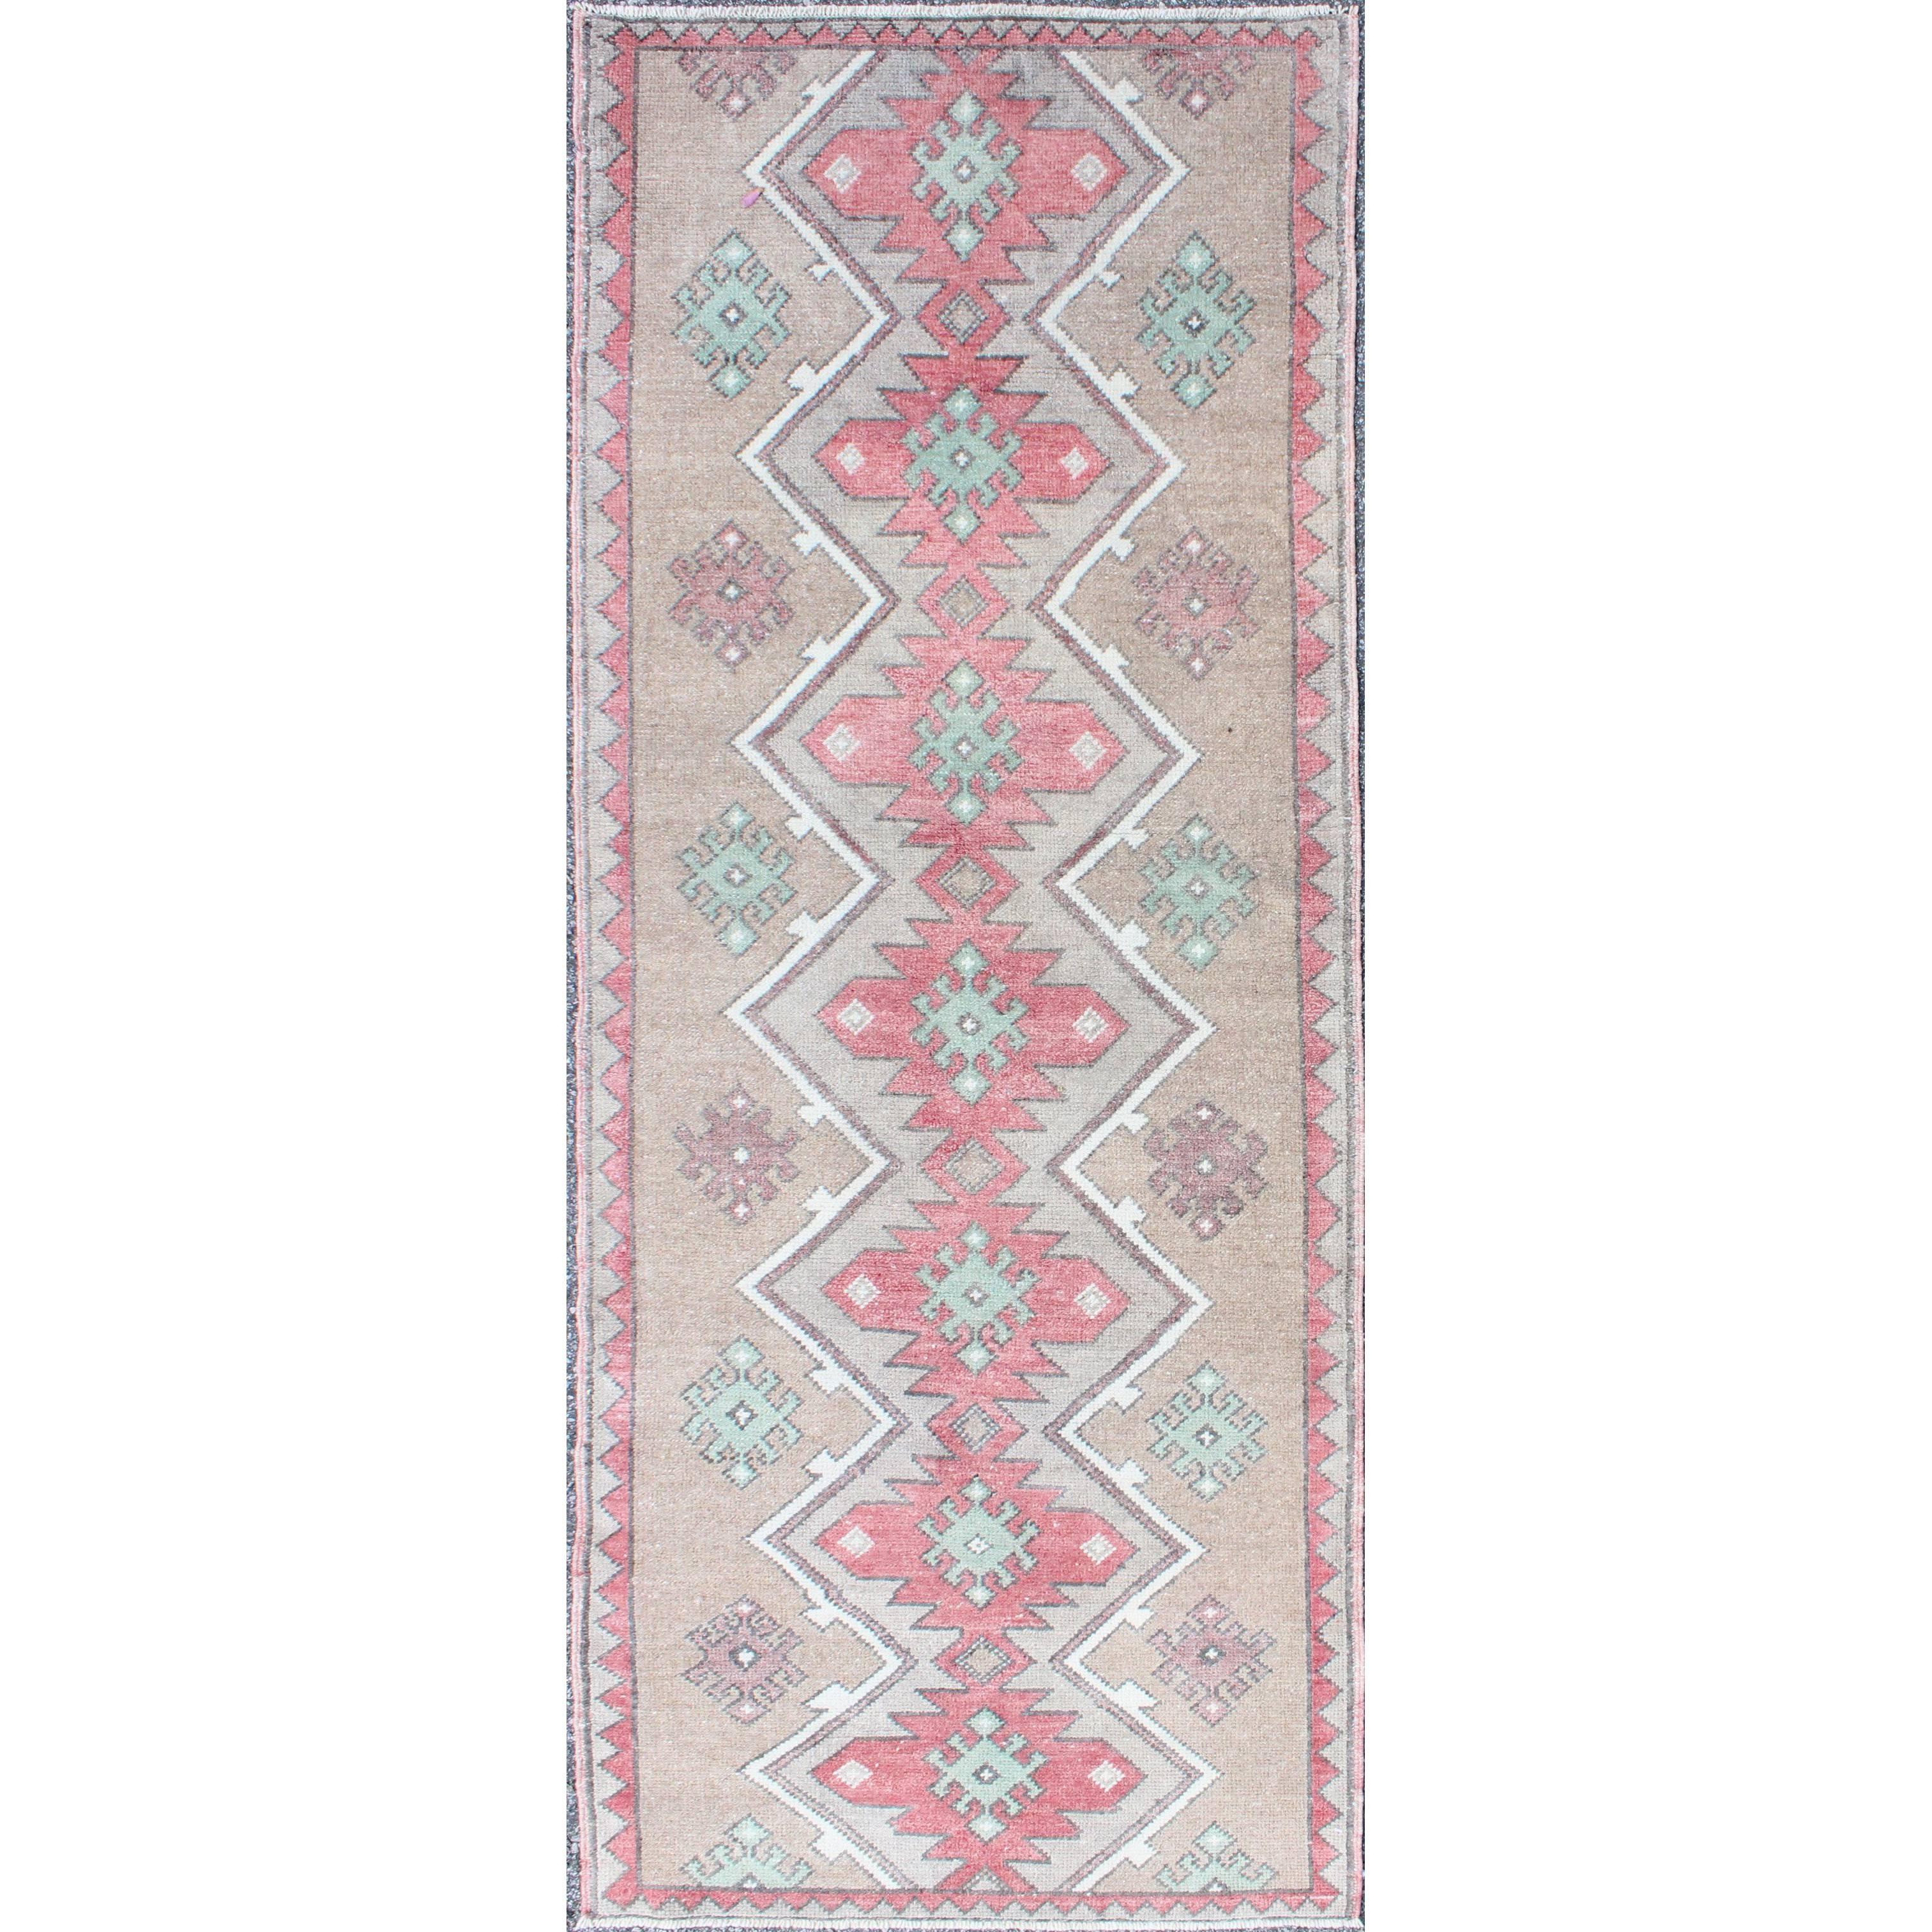 Turkish Tulu Runner With Geometric Medallions in Vivid Coral, Tan, Mint Green For Sale